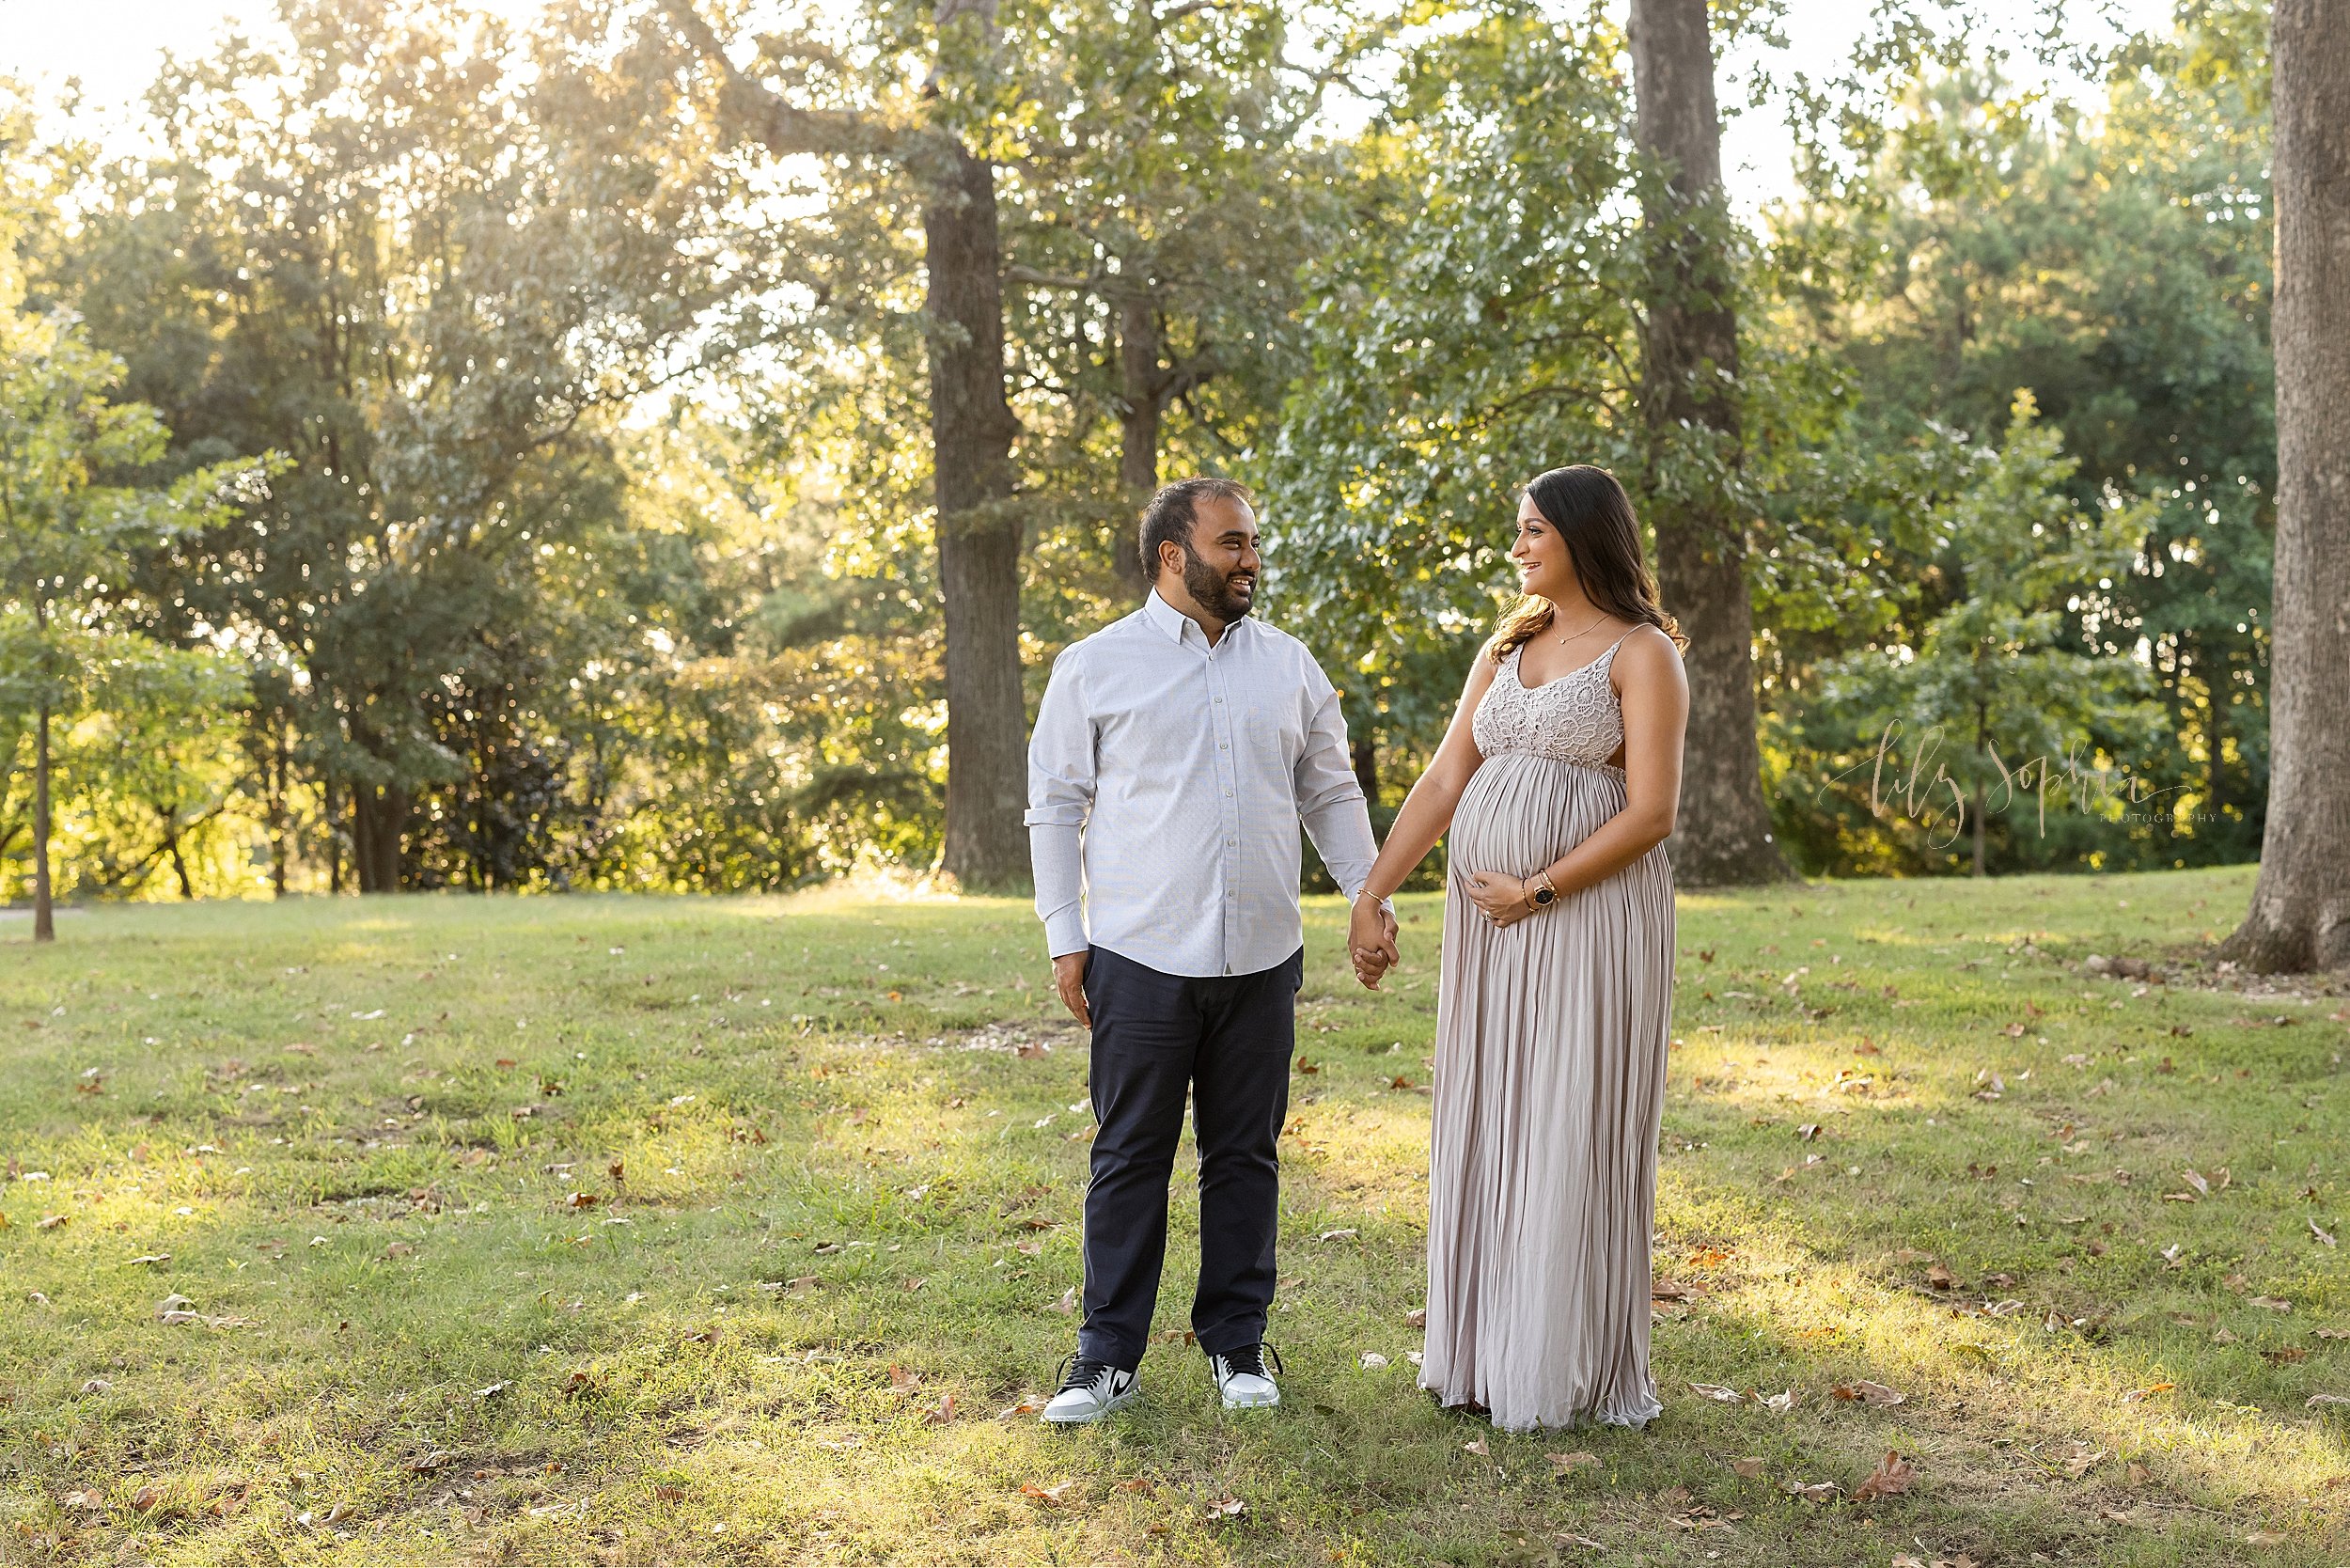  Maternity photo shoot taken in an Atlanta park with the Indian mother to be and father standing and holding hands as they look lovingly at one another at sunset. 